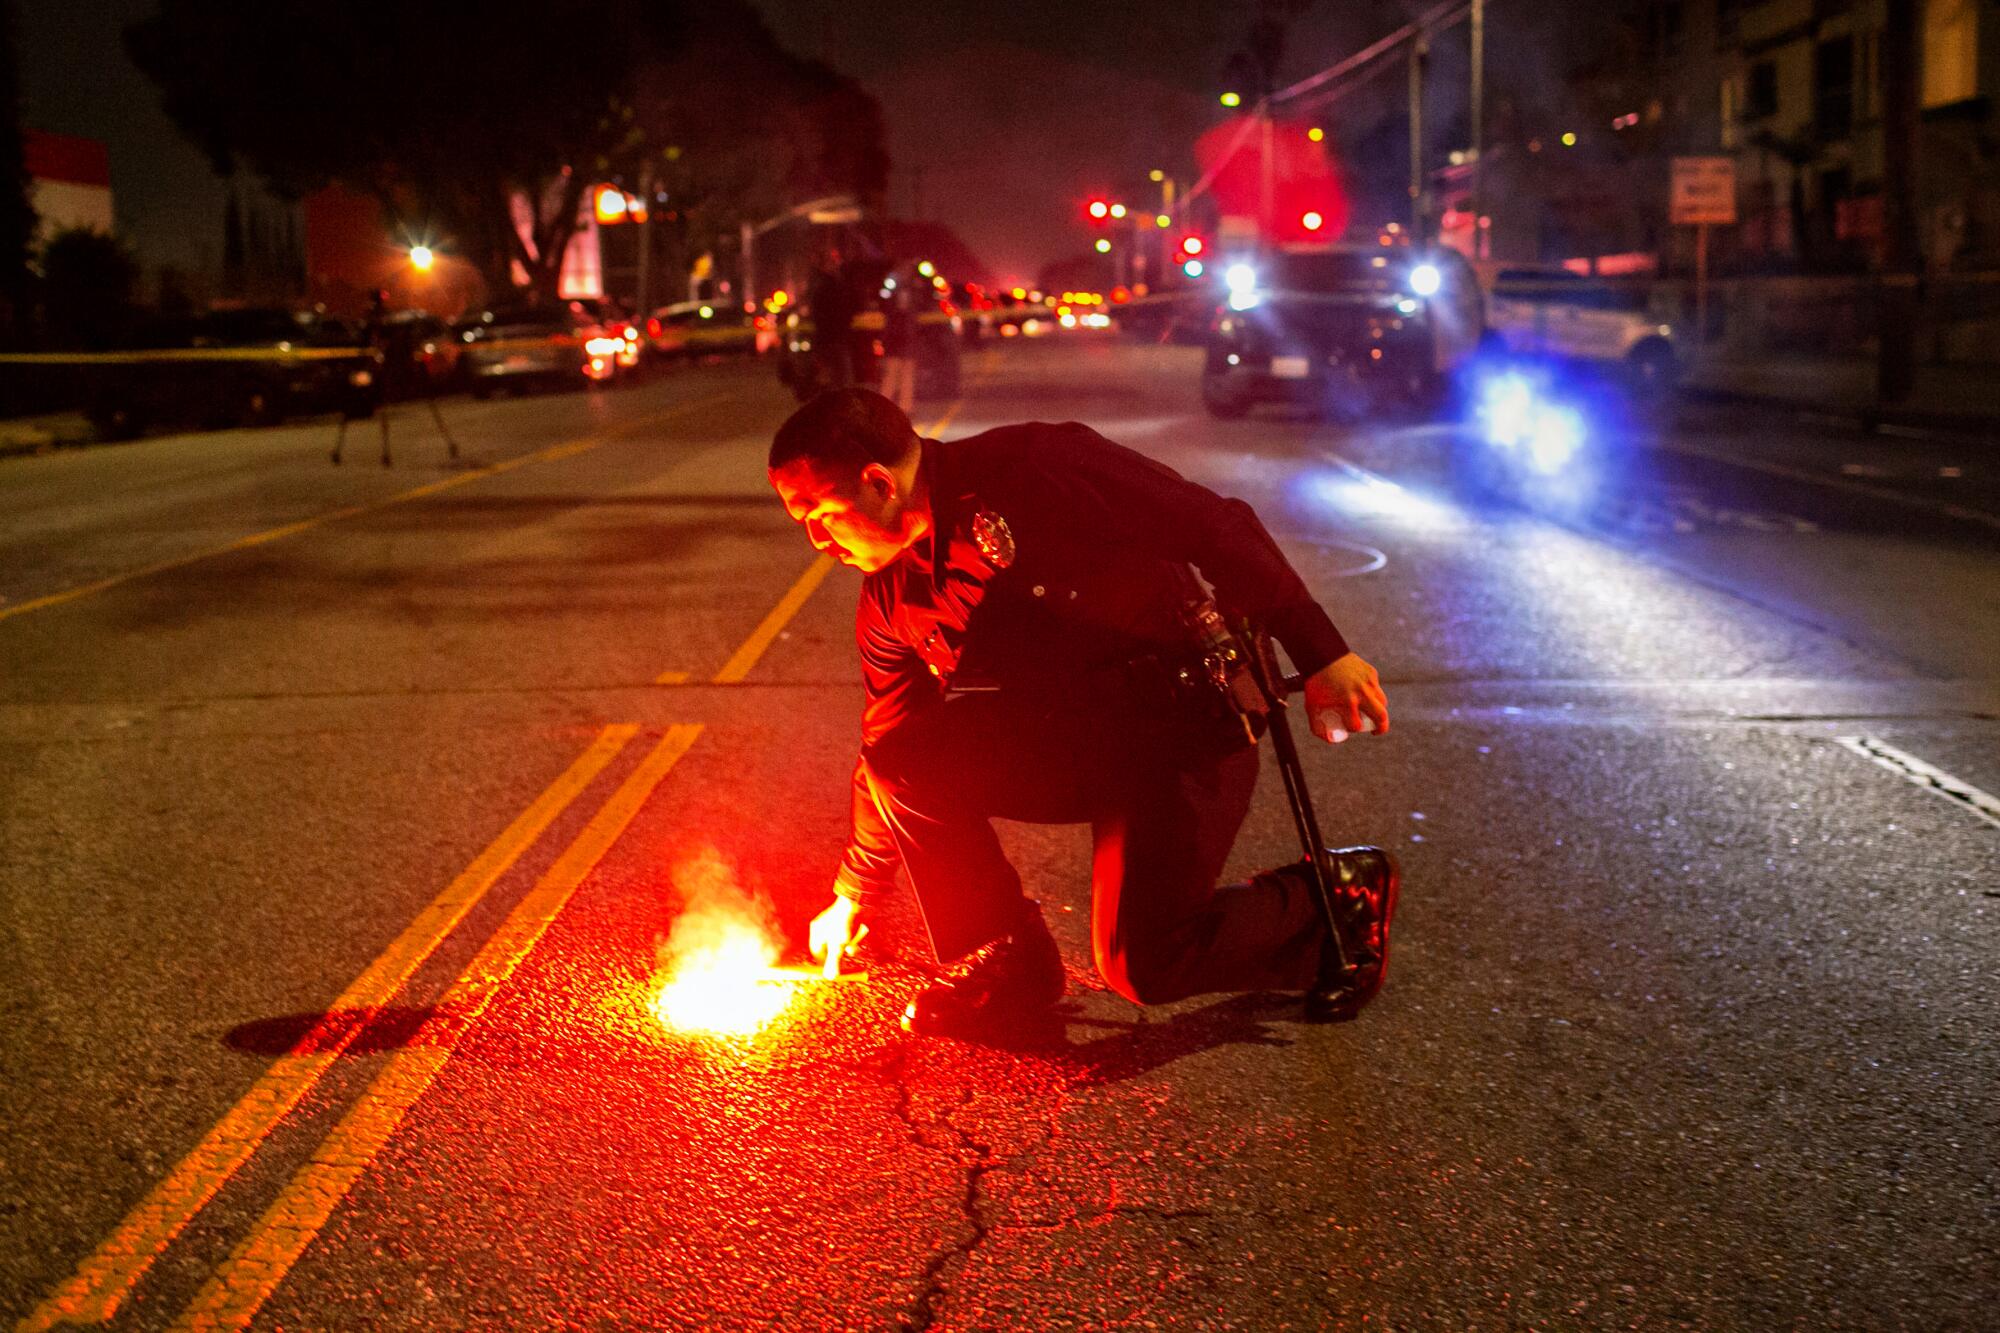 A LAPD officer puts out a red flare in the middle of a road